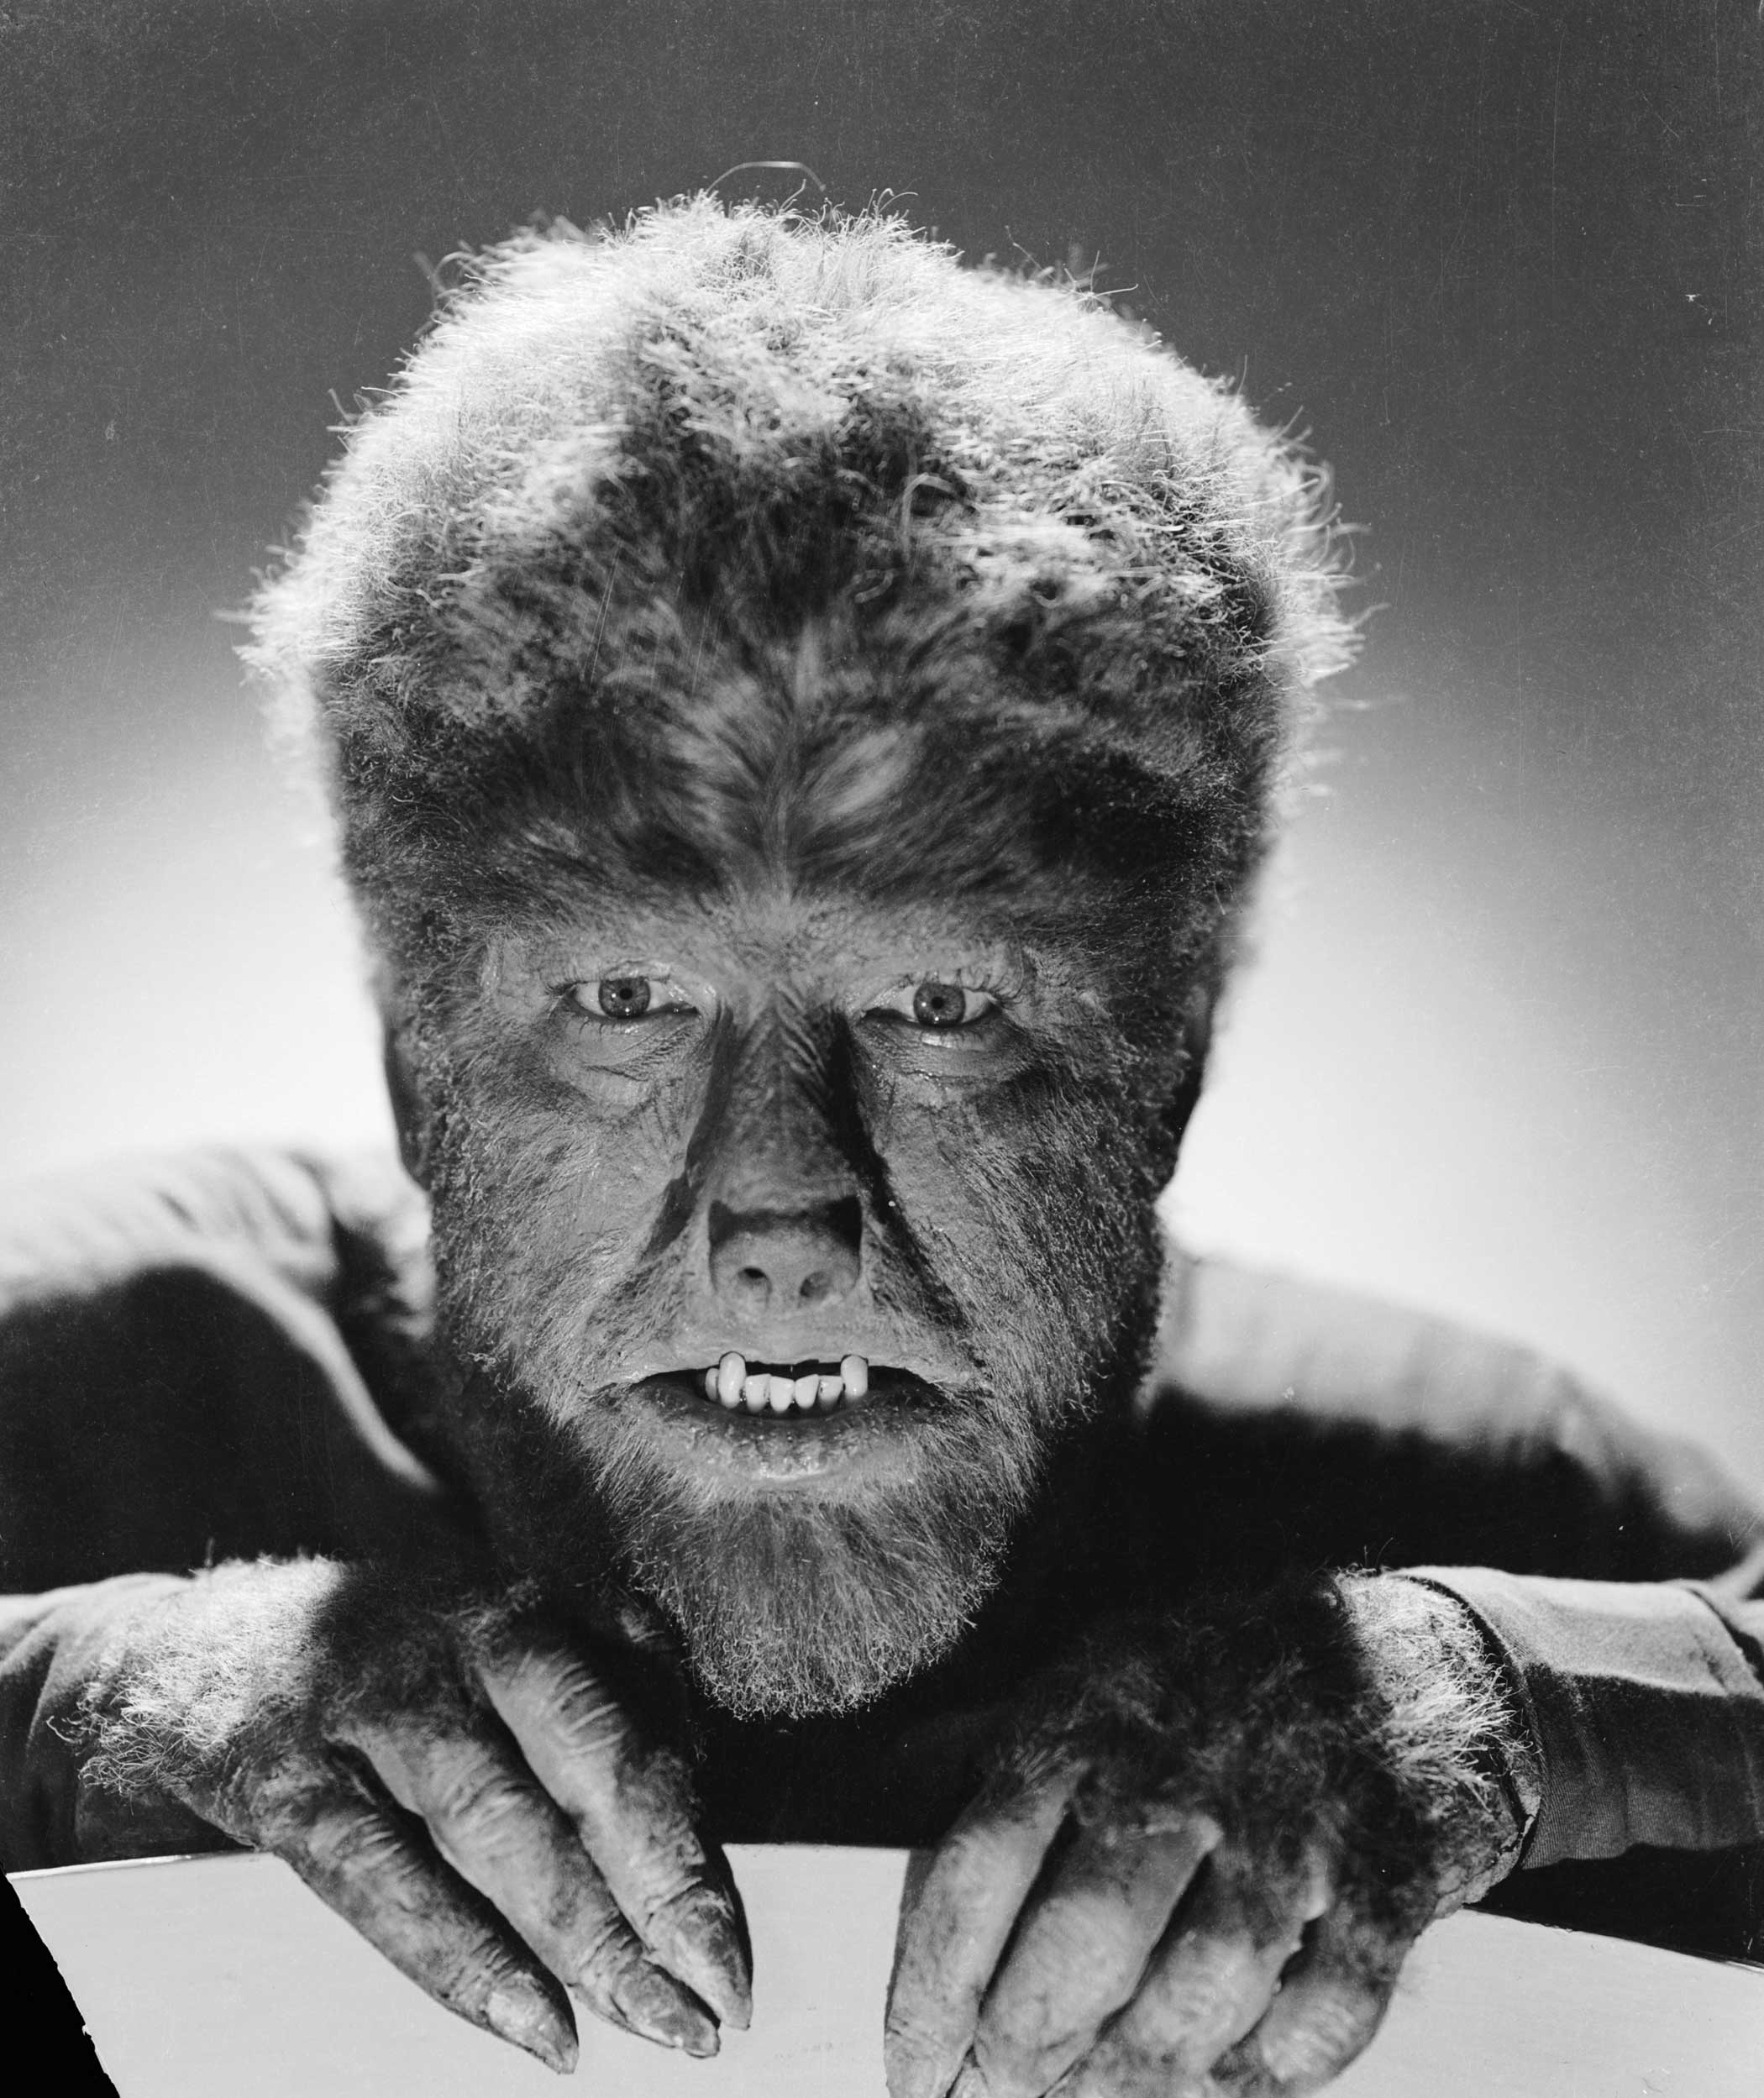 The Wolf Man from The Wolf Man, 1941.